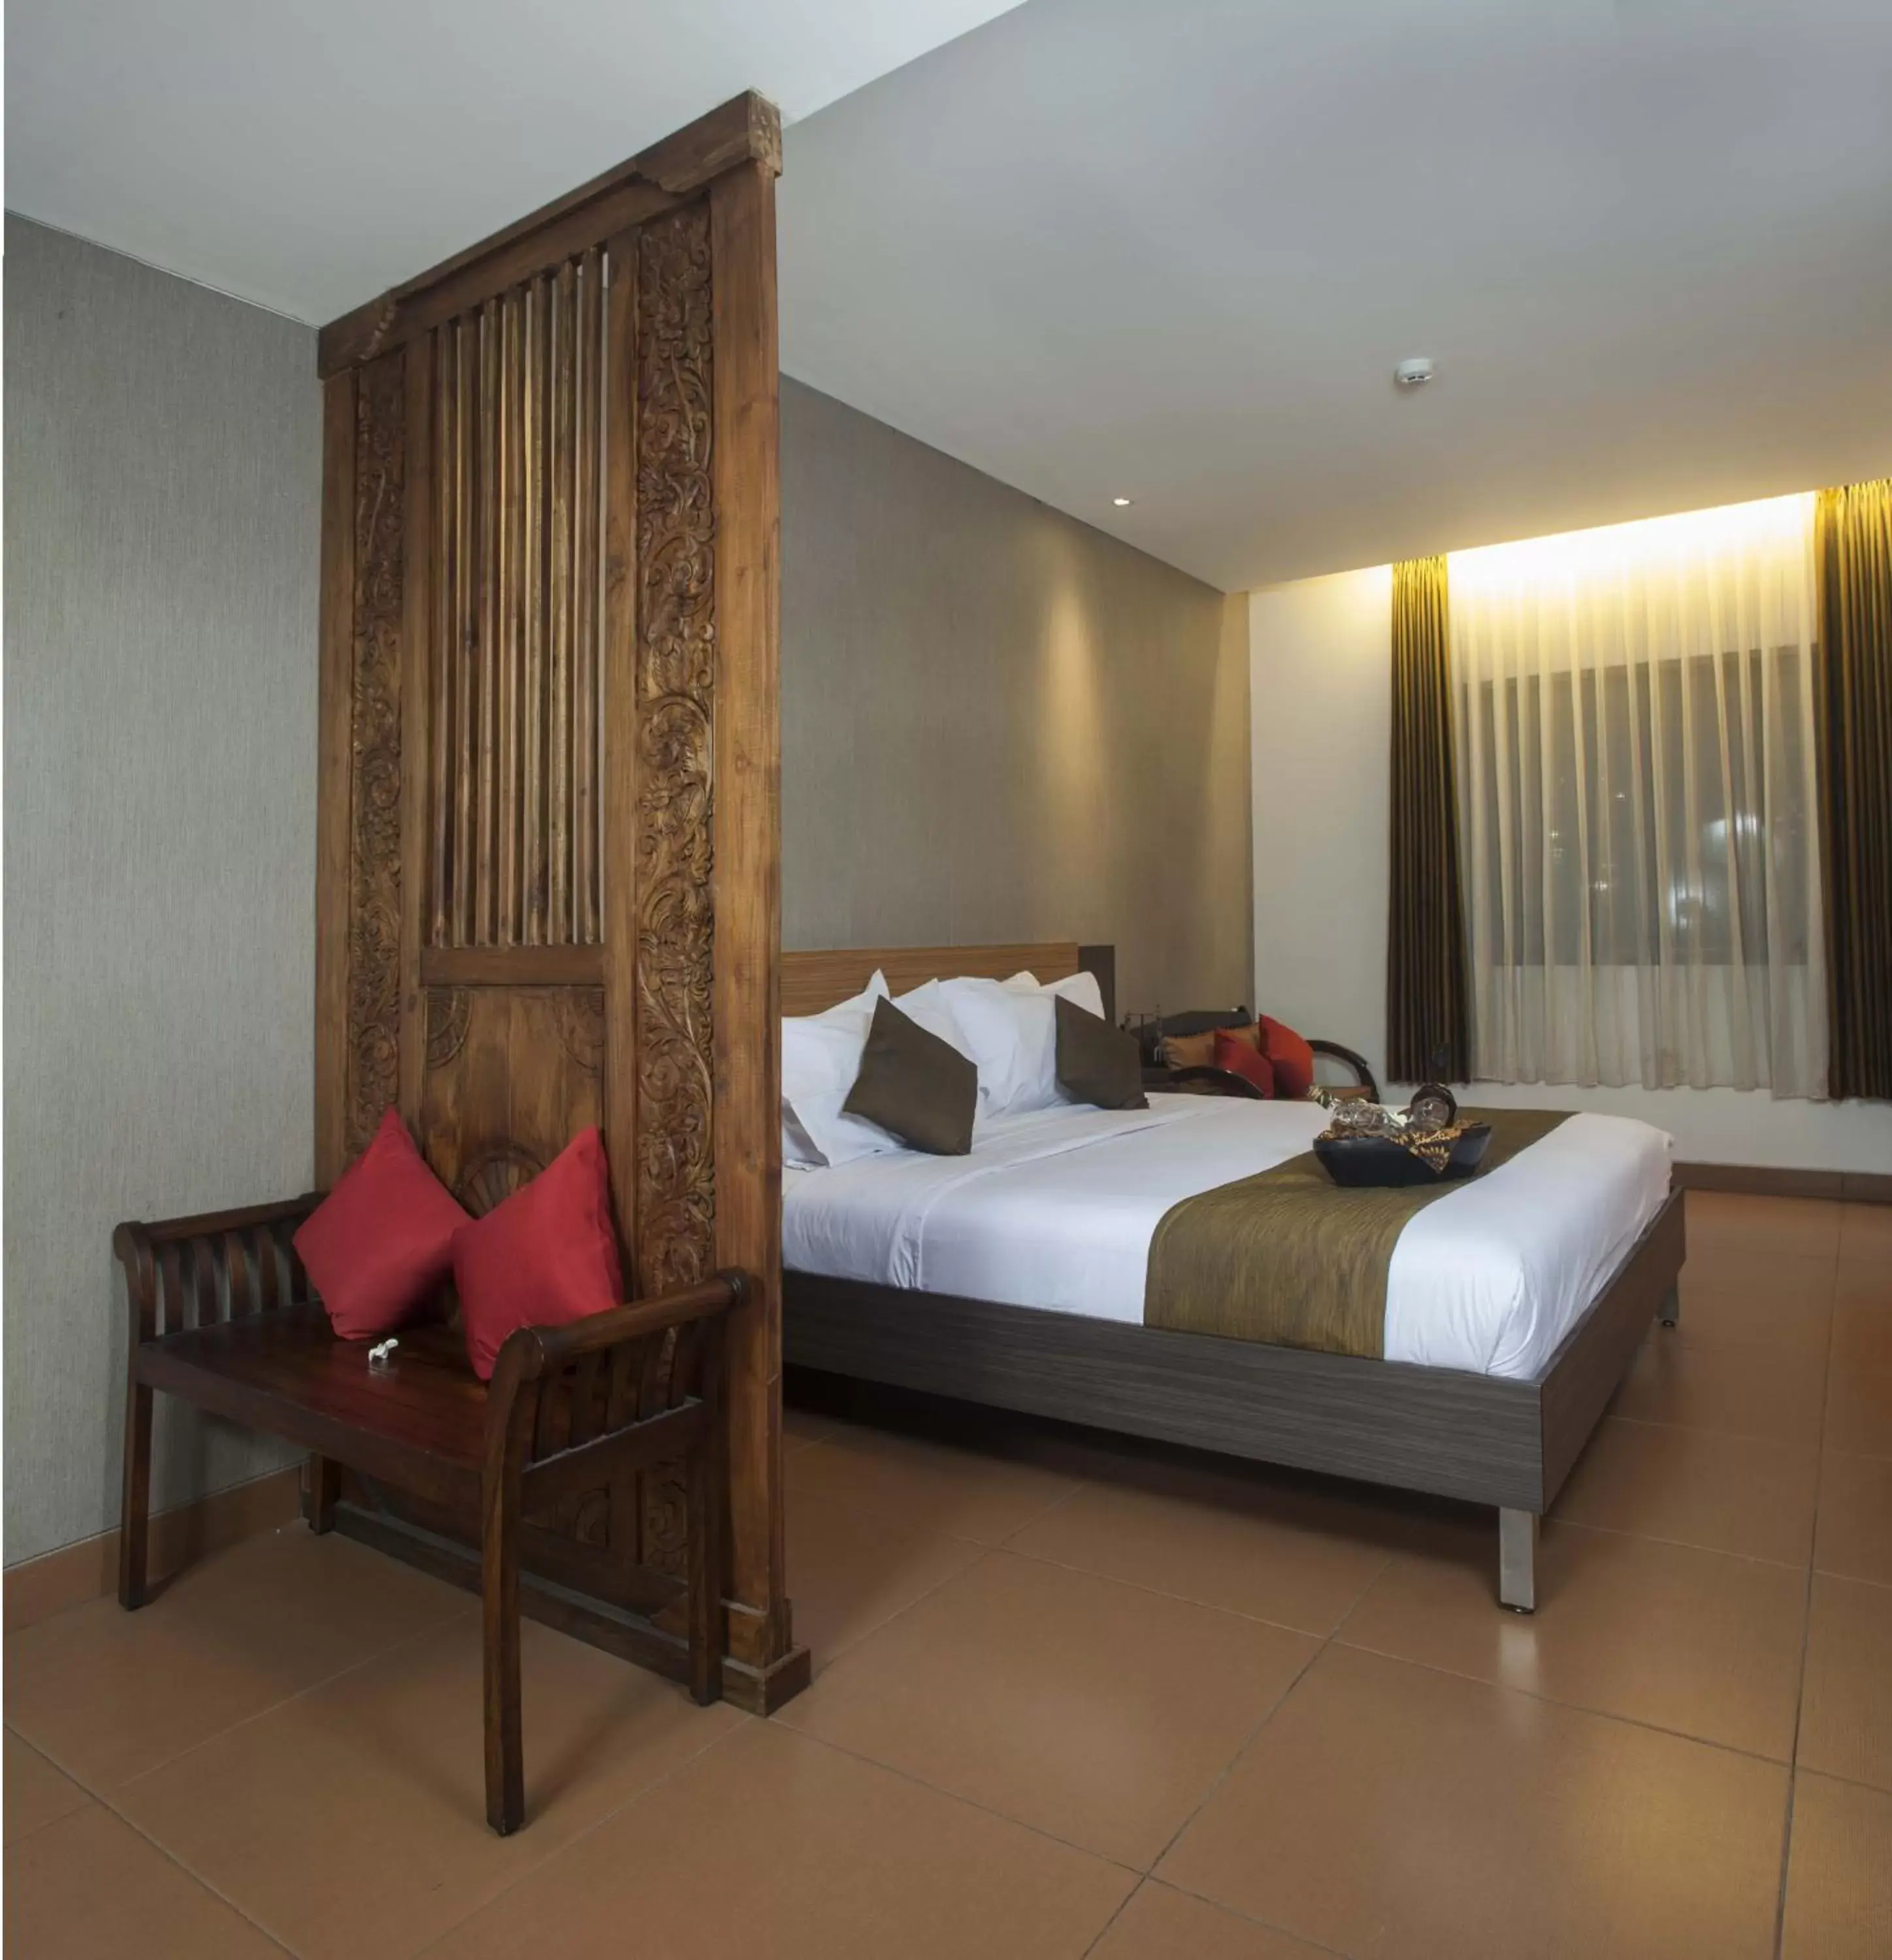 Bedroom, Room Photo in Sukajadi Hotel, Convention and Gallery